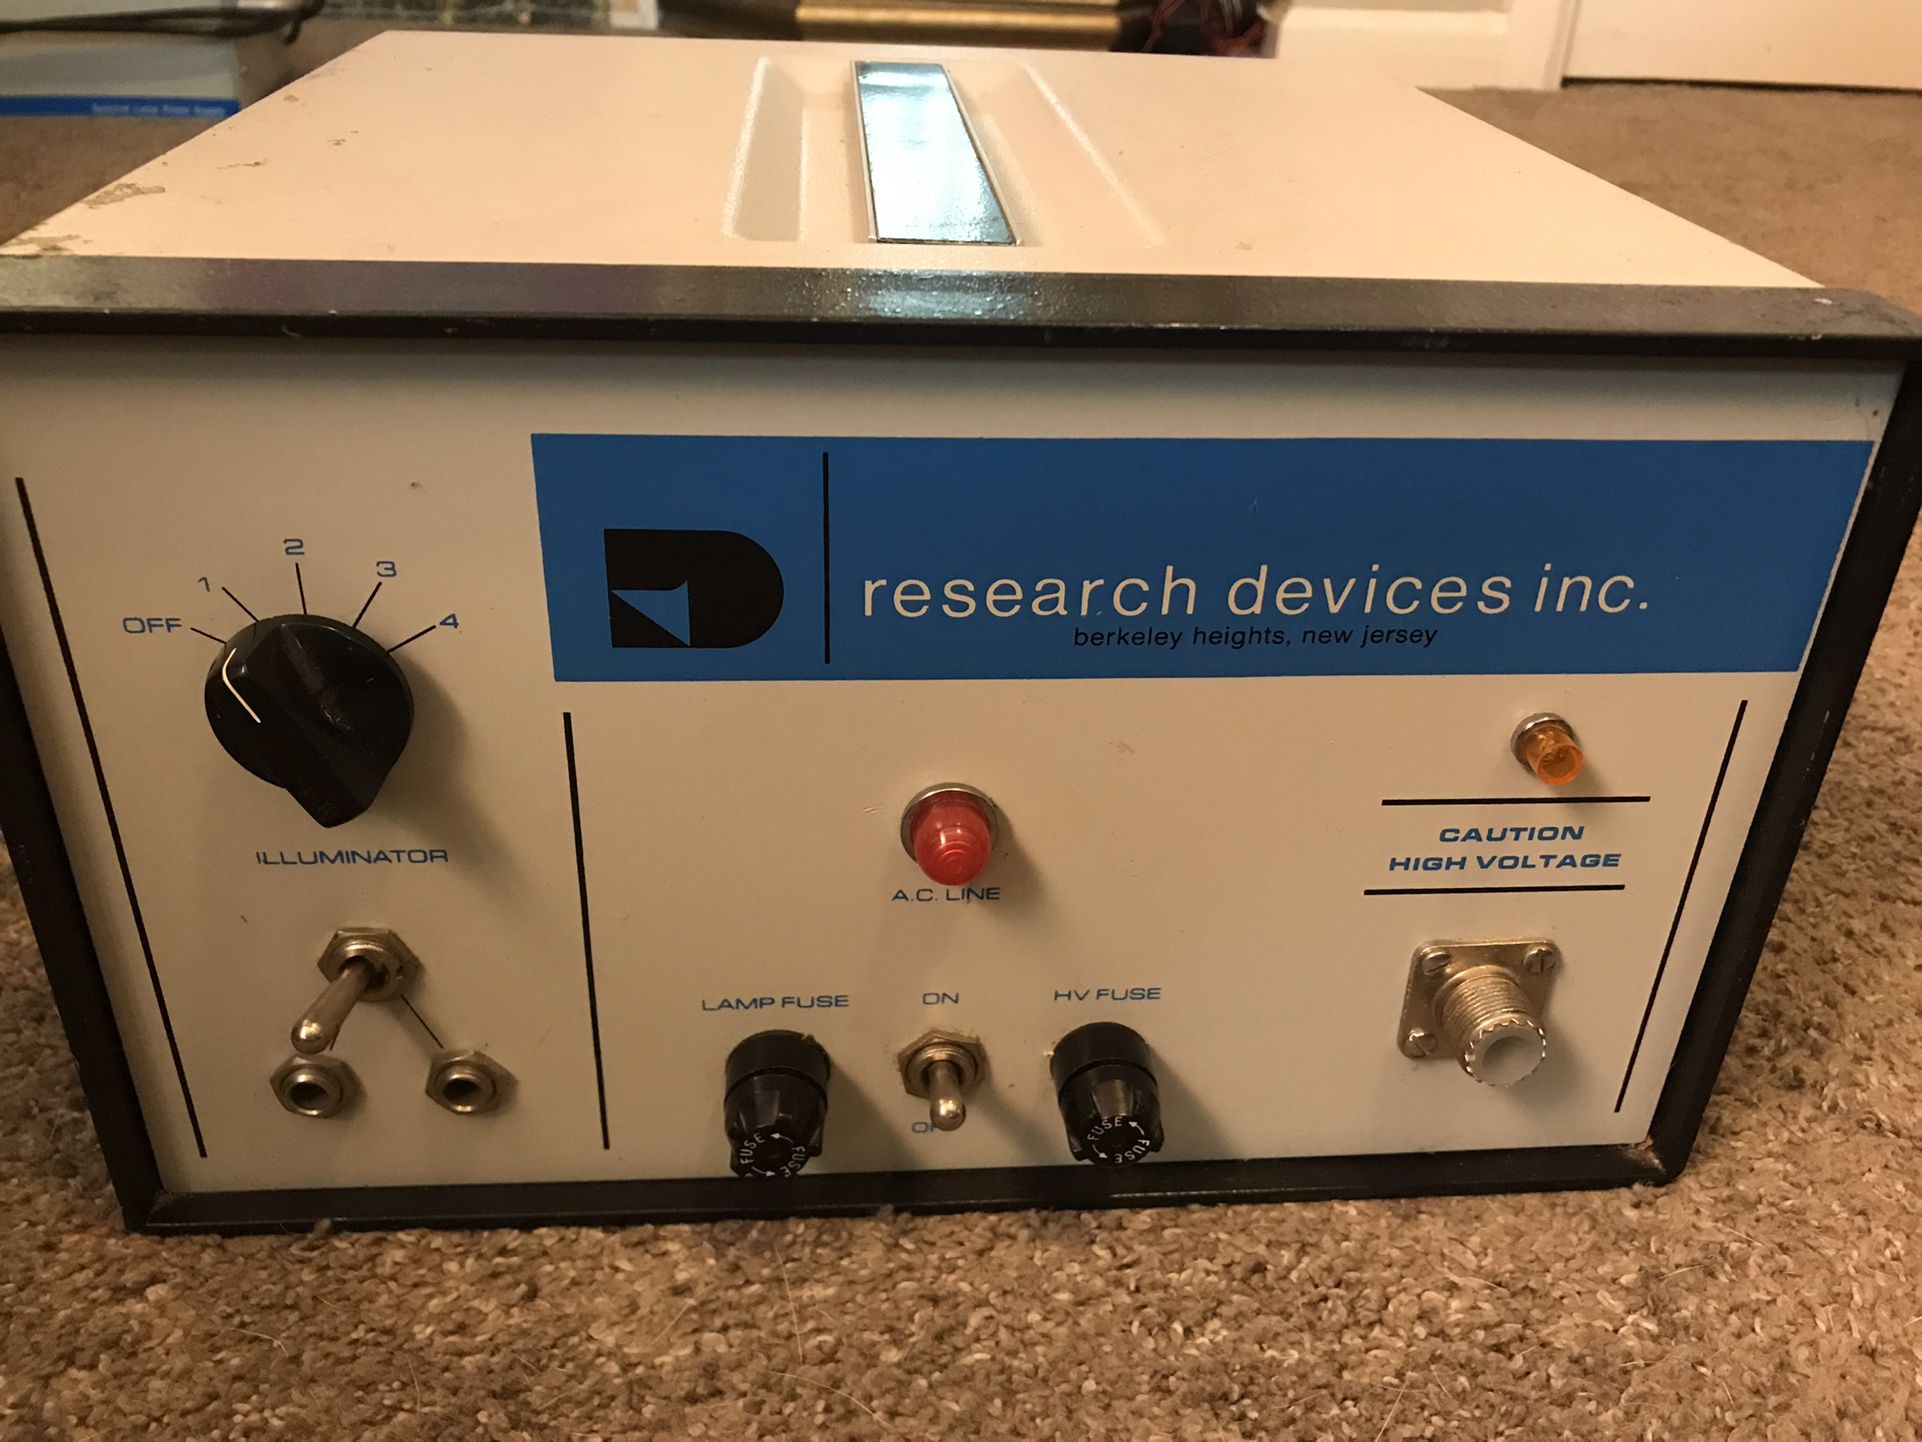 Research Device infrared microscope Psu Lab / Test Equipment